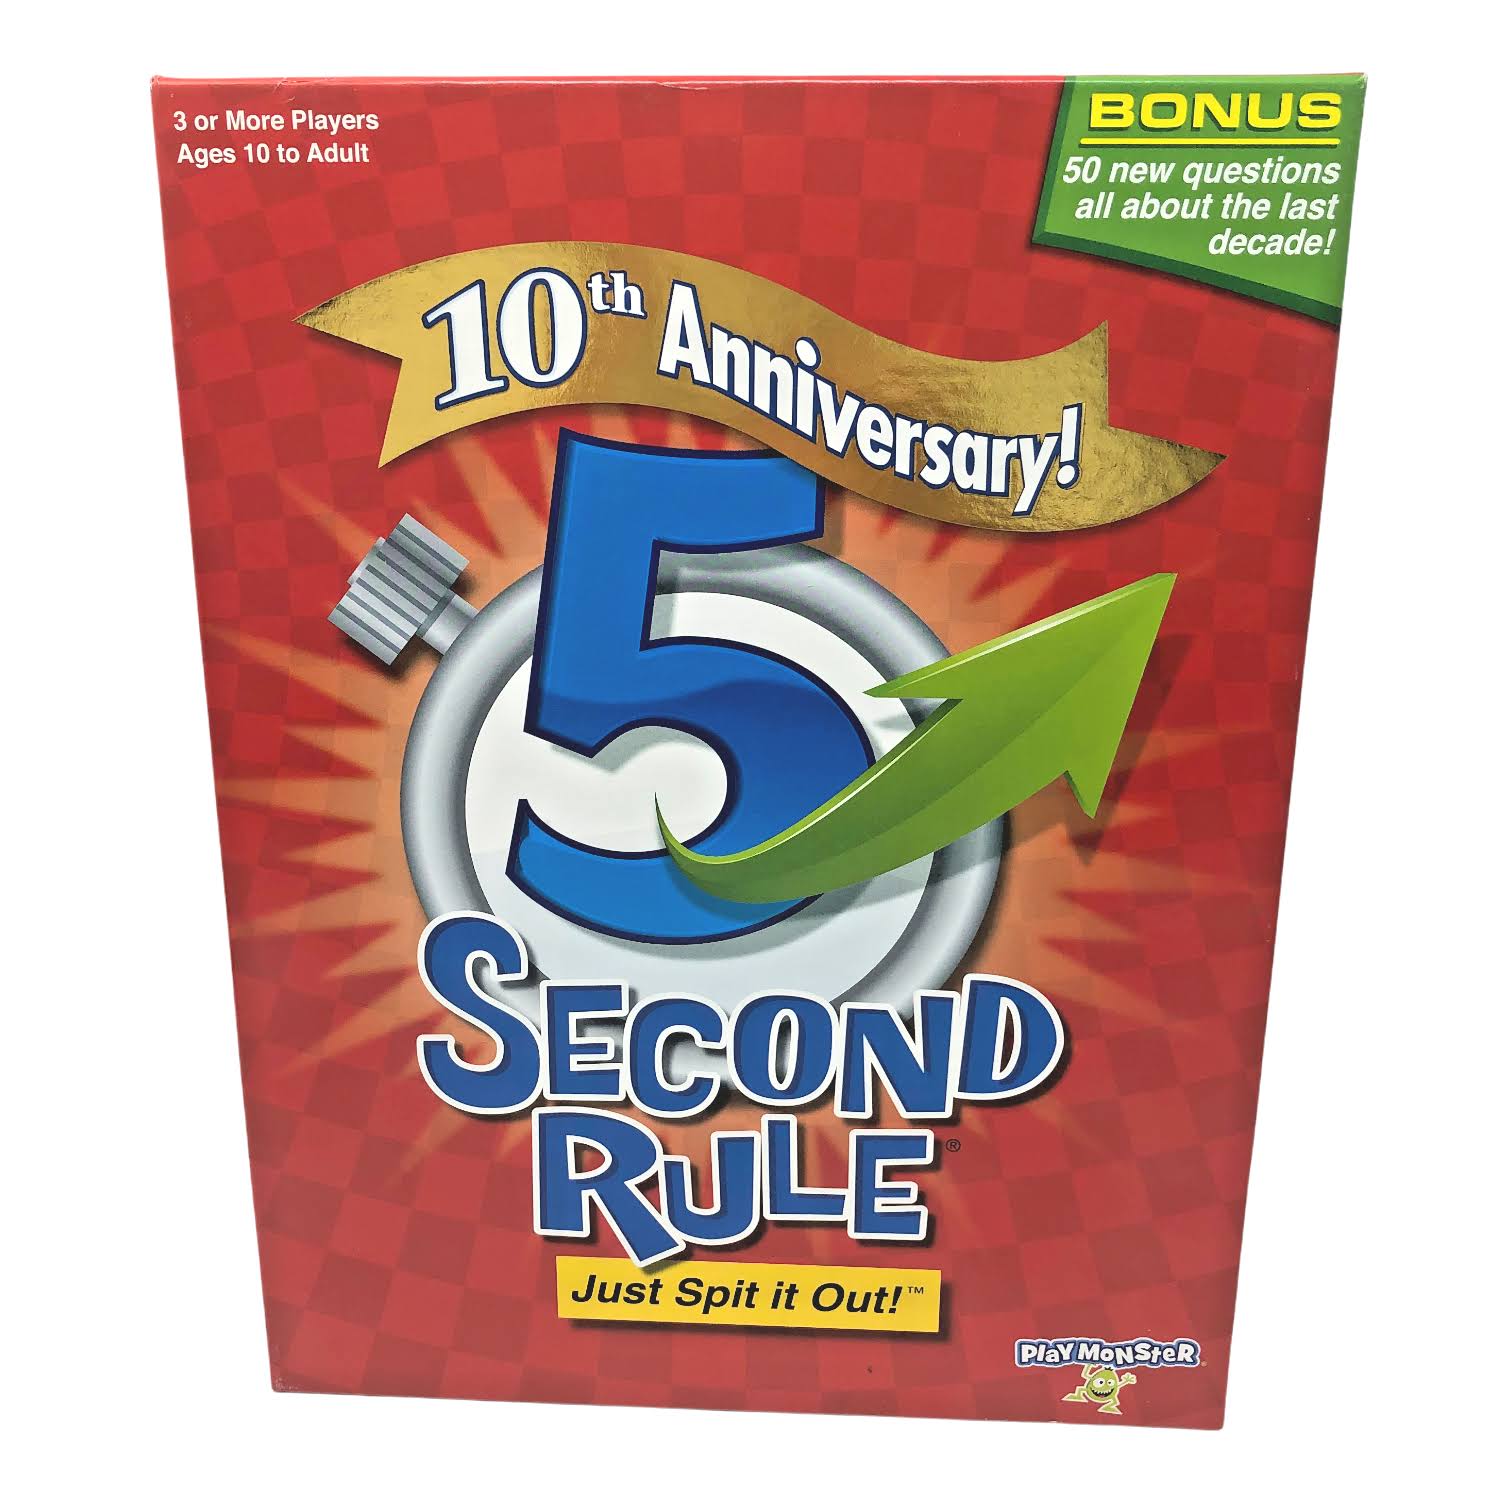 5 Second Rule Just Spit It Out 10th Anniversary Edition